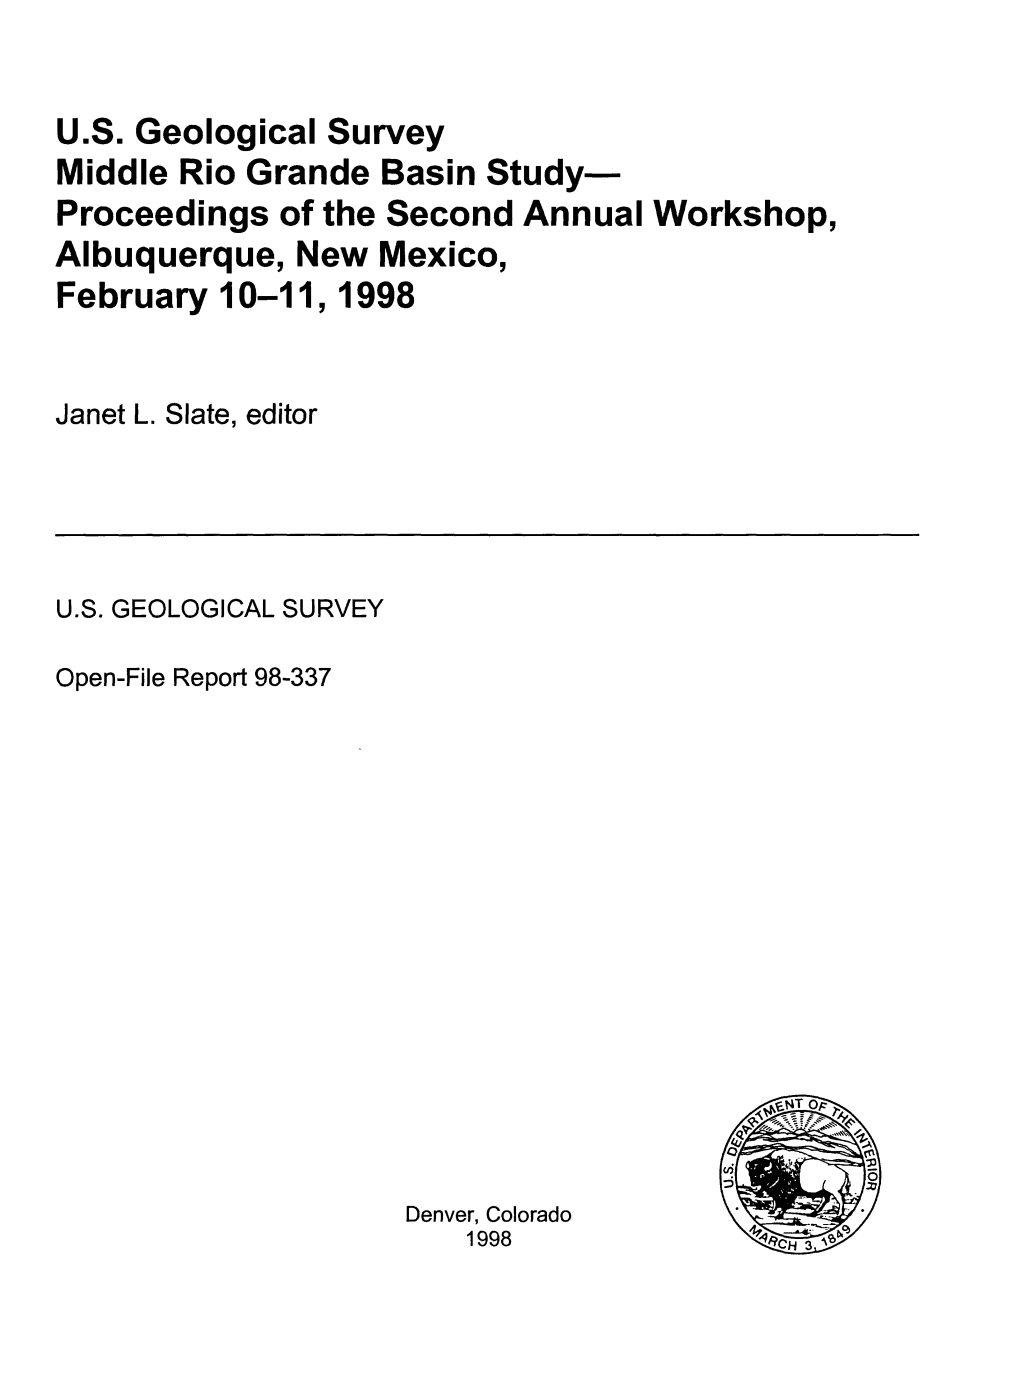 U.S. Geological Survey Middle Rio Grande Basin Study Proceedings of the Second Annual Workshop, Albuquerque, New Mexico, February 10-11,1998